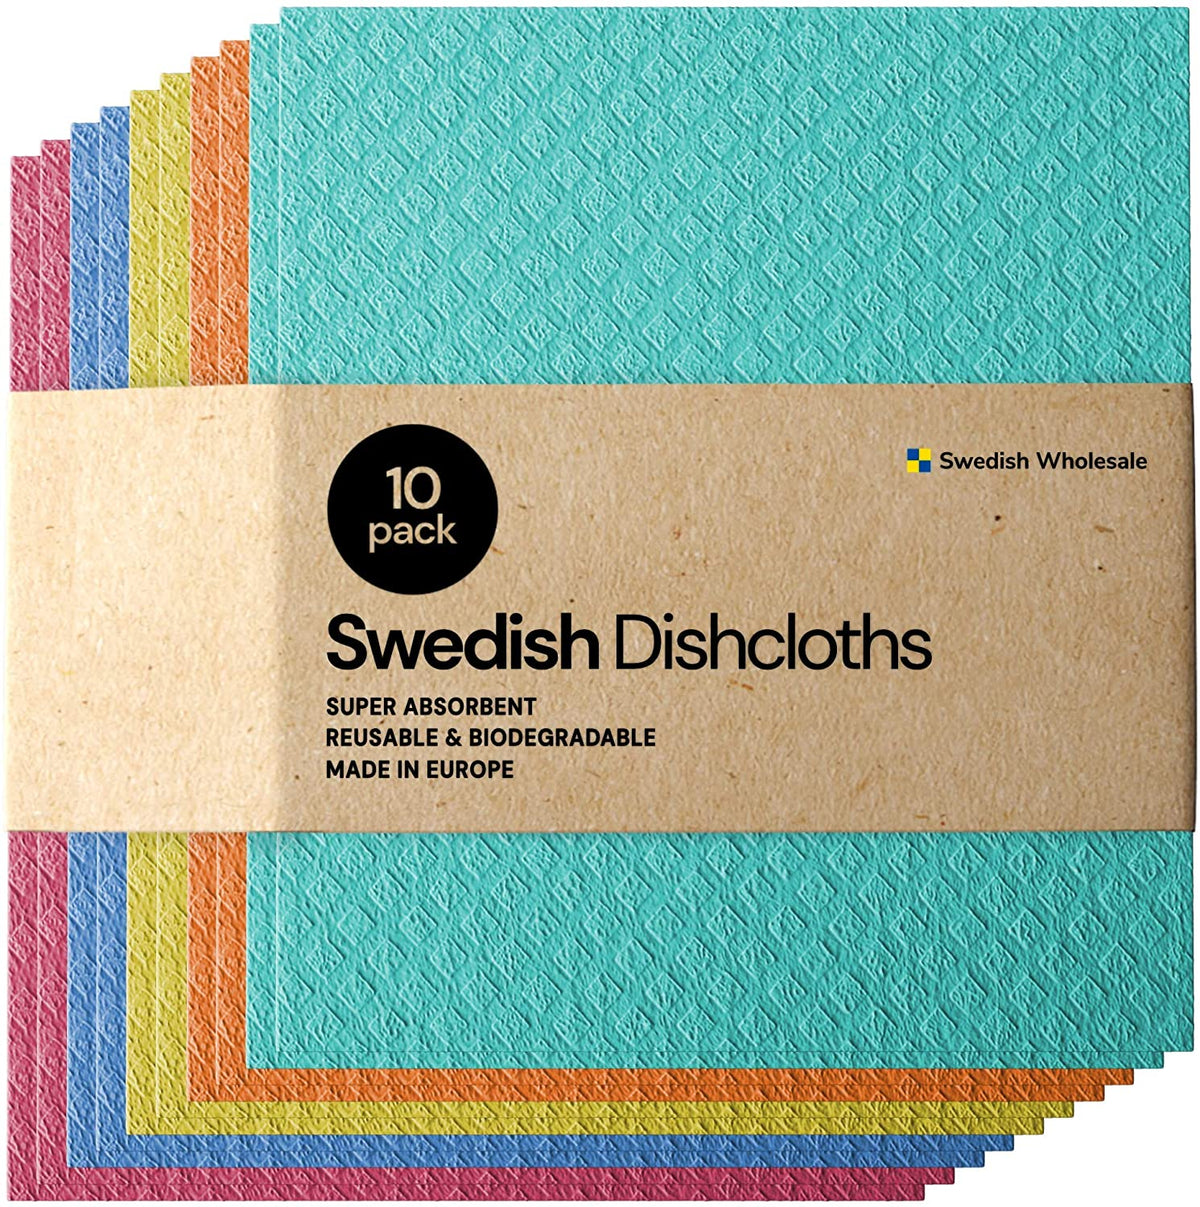 The EcoGurus Swedish Dishcloths for Kitchen, Multi-Surface, Cellulose &  Cotton, Original Made in Sweden - Eco-Friendly, Reusable, Absorbent, No  Odor